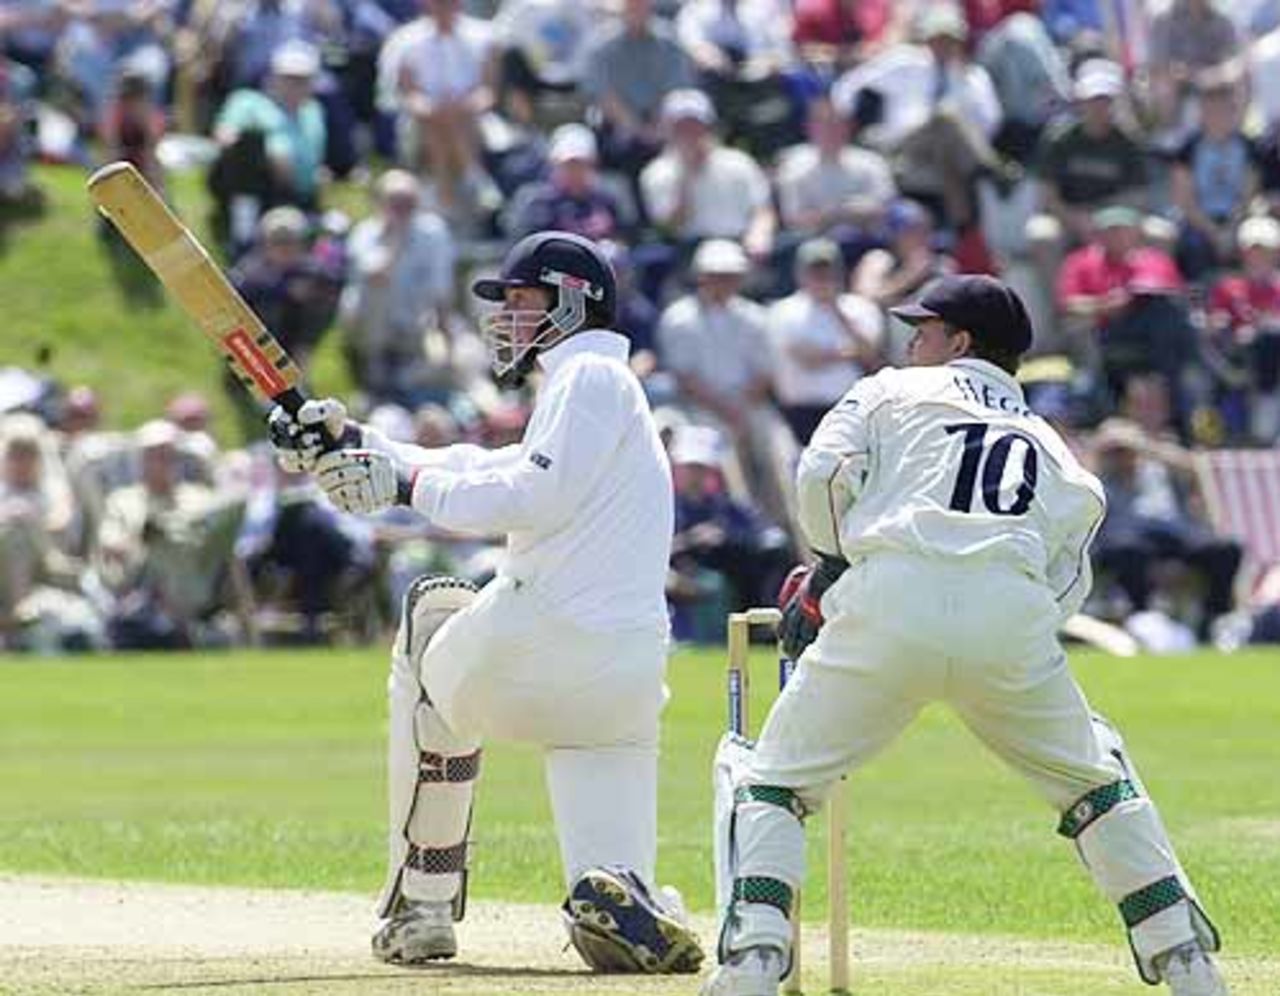 Durham's Gough sweeps a delivery from Schofield in his innings of 27, C+G Quarter Final, Blackpool, 25 Jul 2001